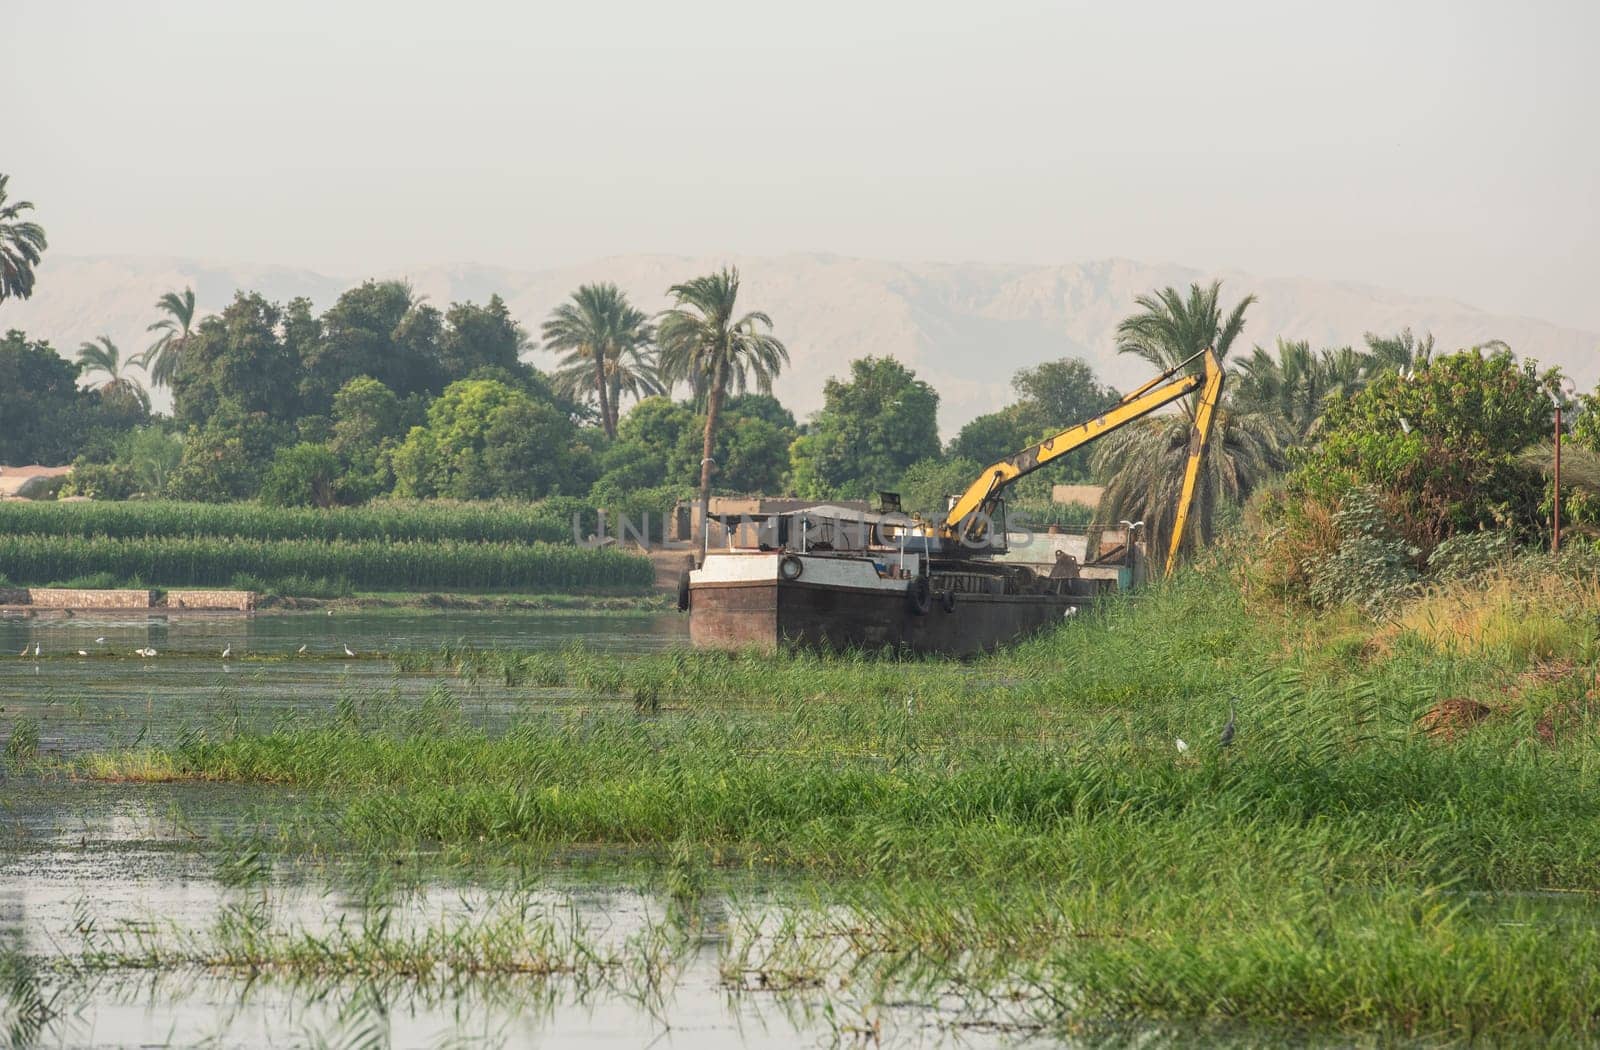 Panoramic landscape view across african river with large dredging barge boat working on river bank